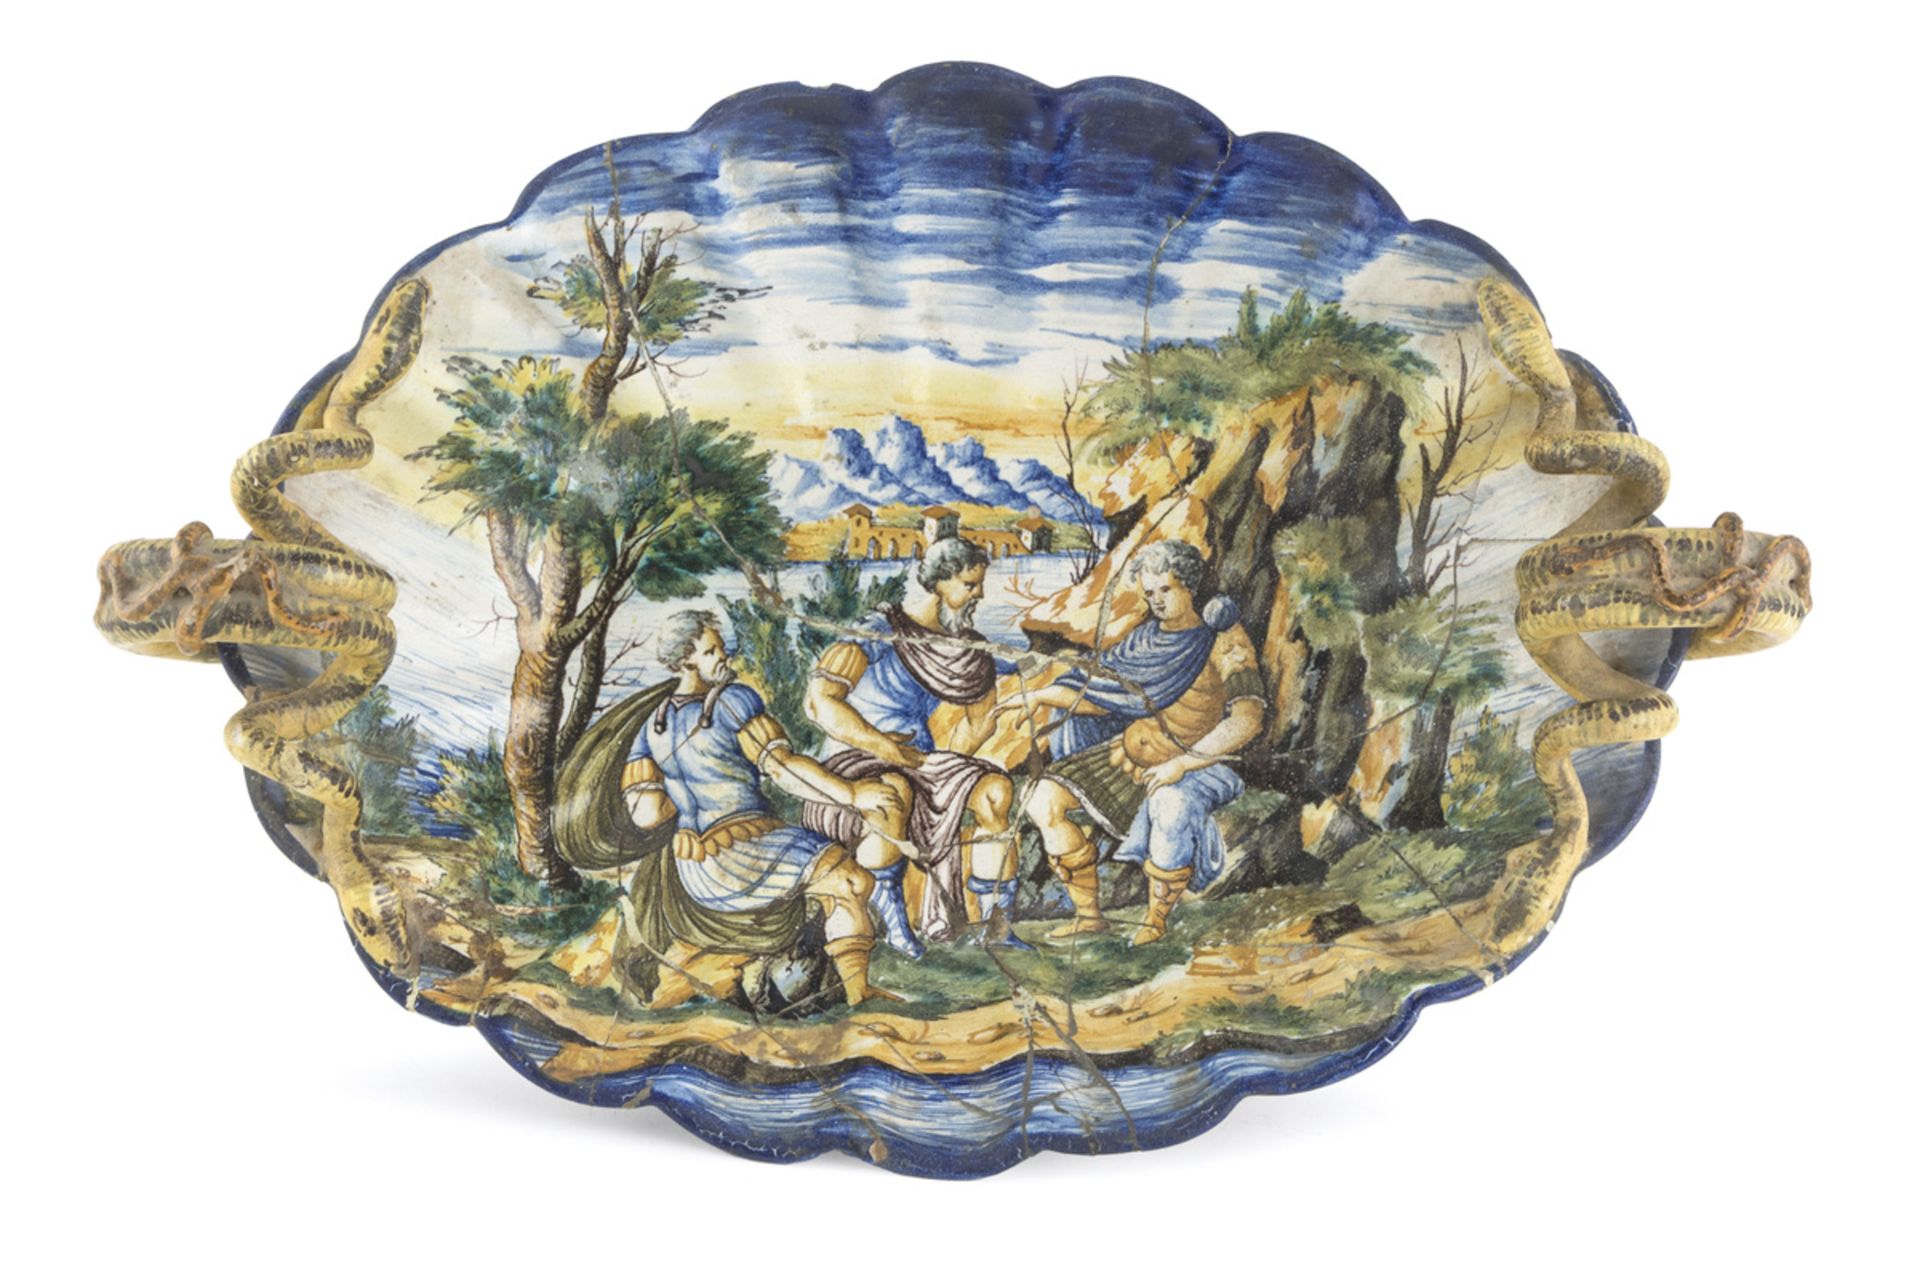 BEAUTIFUL CENTER IN MAIOLICA PROBABLY ROMAN CASTLES 19TH CENTURY - Image 2 of 2